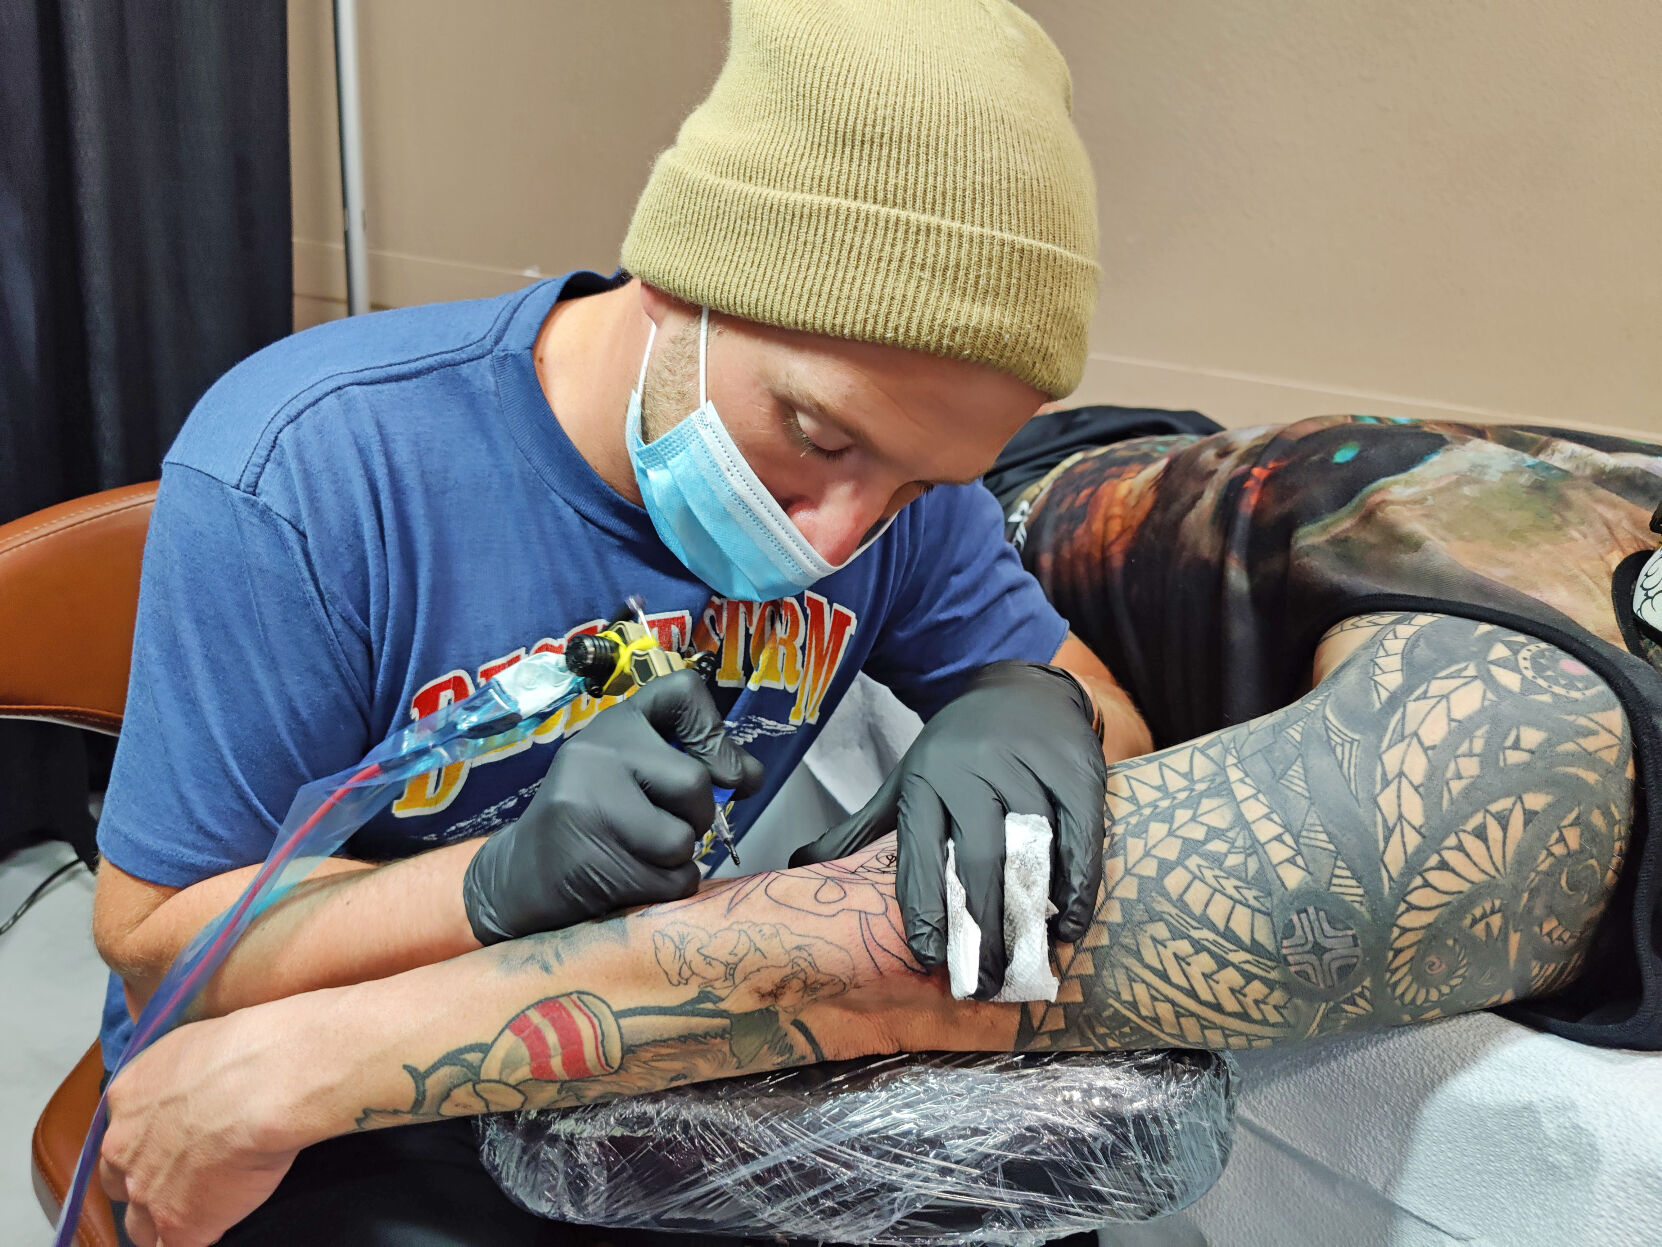 Work as a tattoo artist and make 100 and hour in Seneca